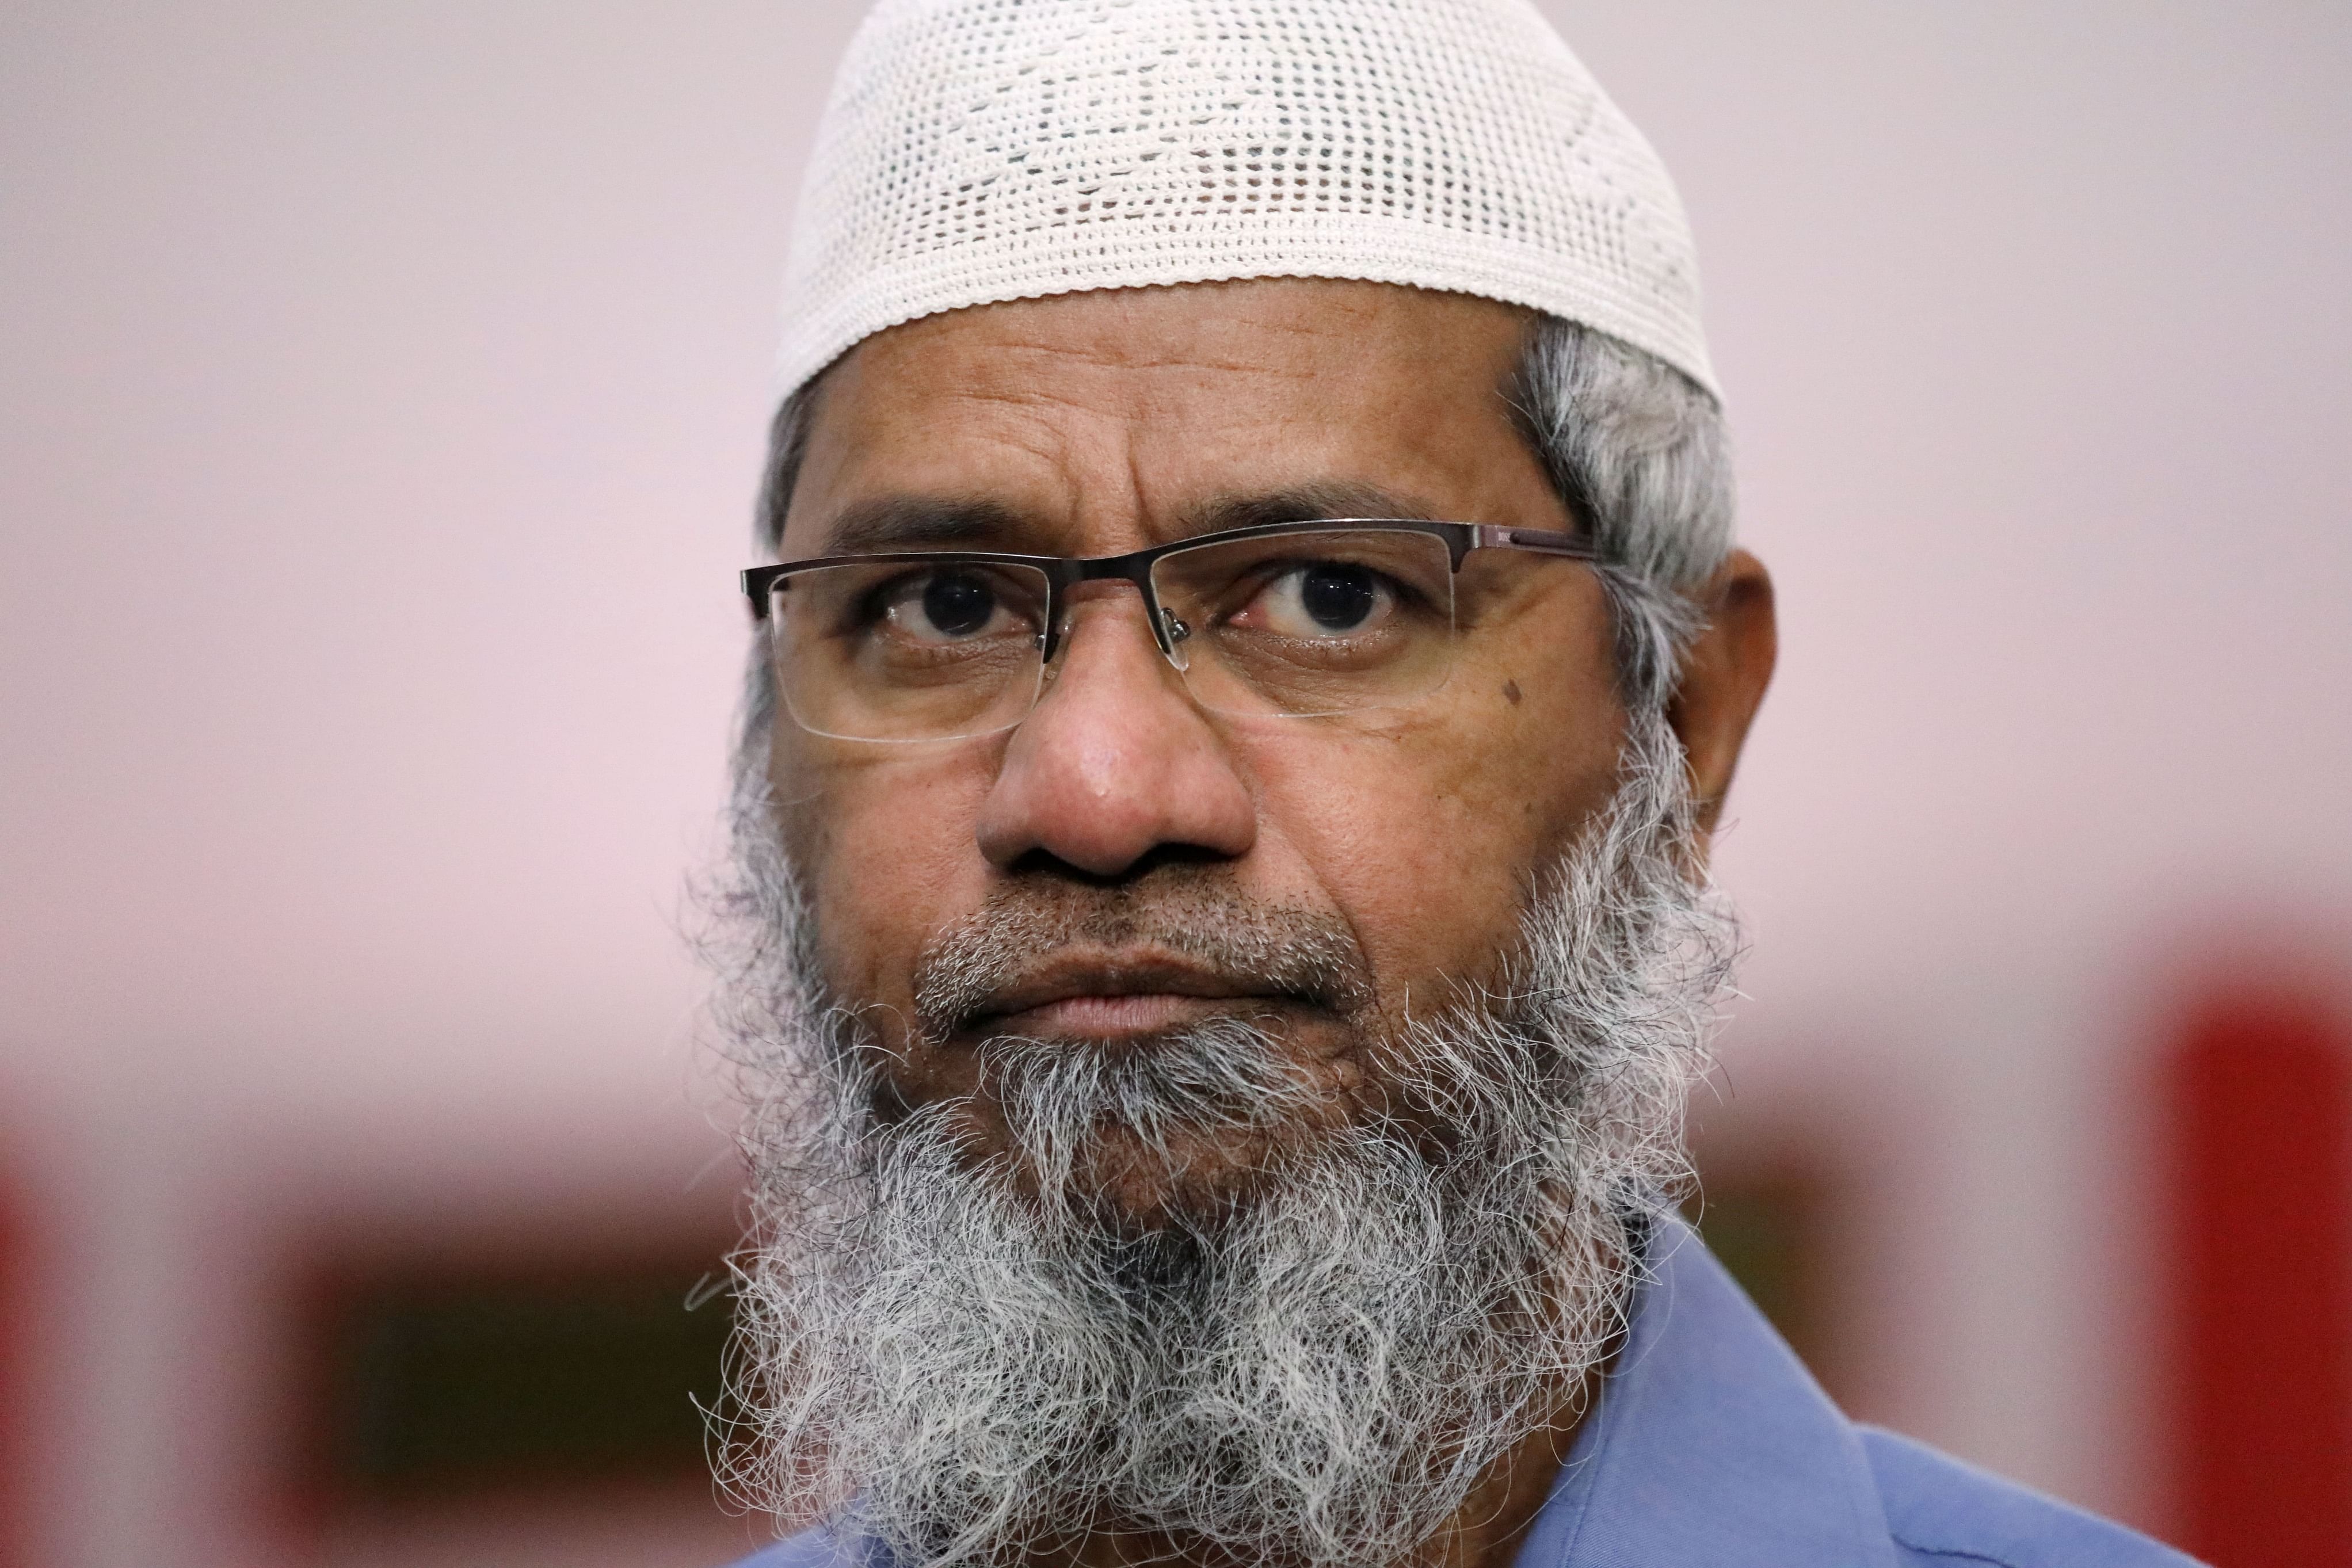 In his Zakir Naik said that he refused the offer of safe passage in exchange for support on revoking Article 370. (Reuters Photo)